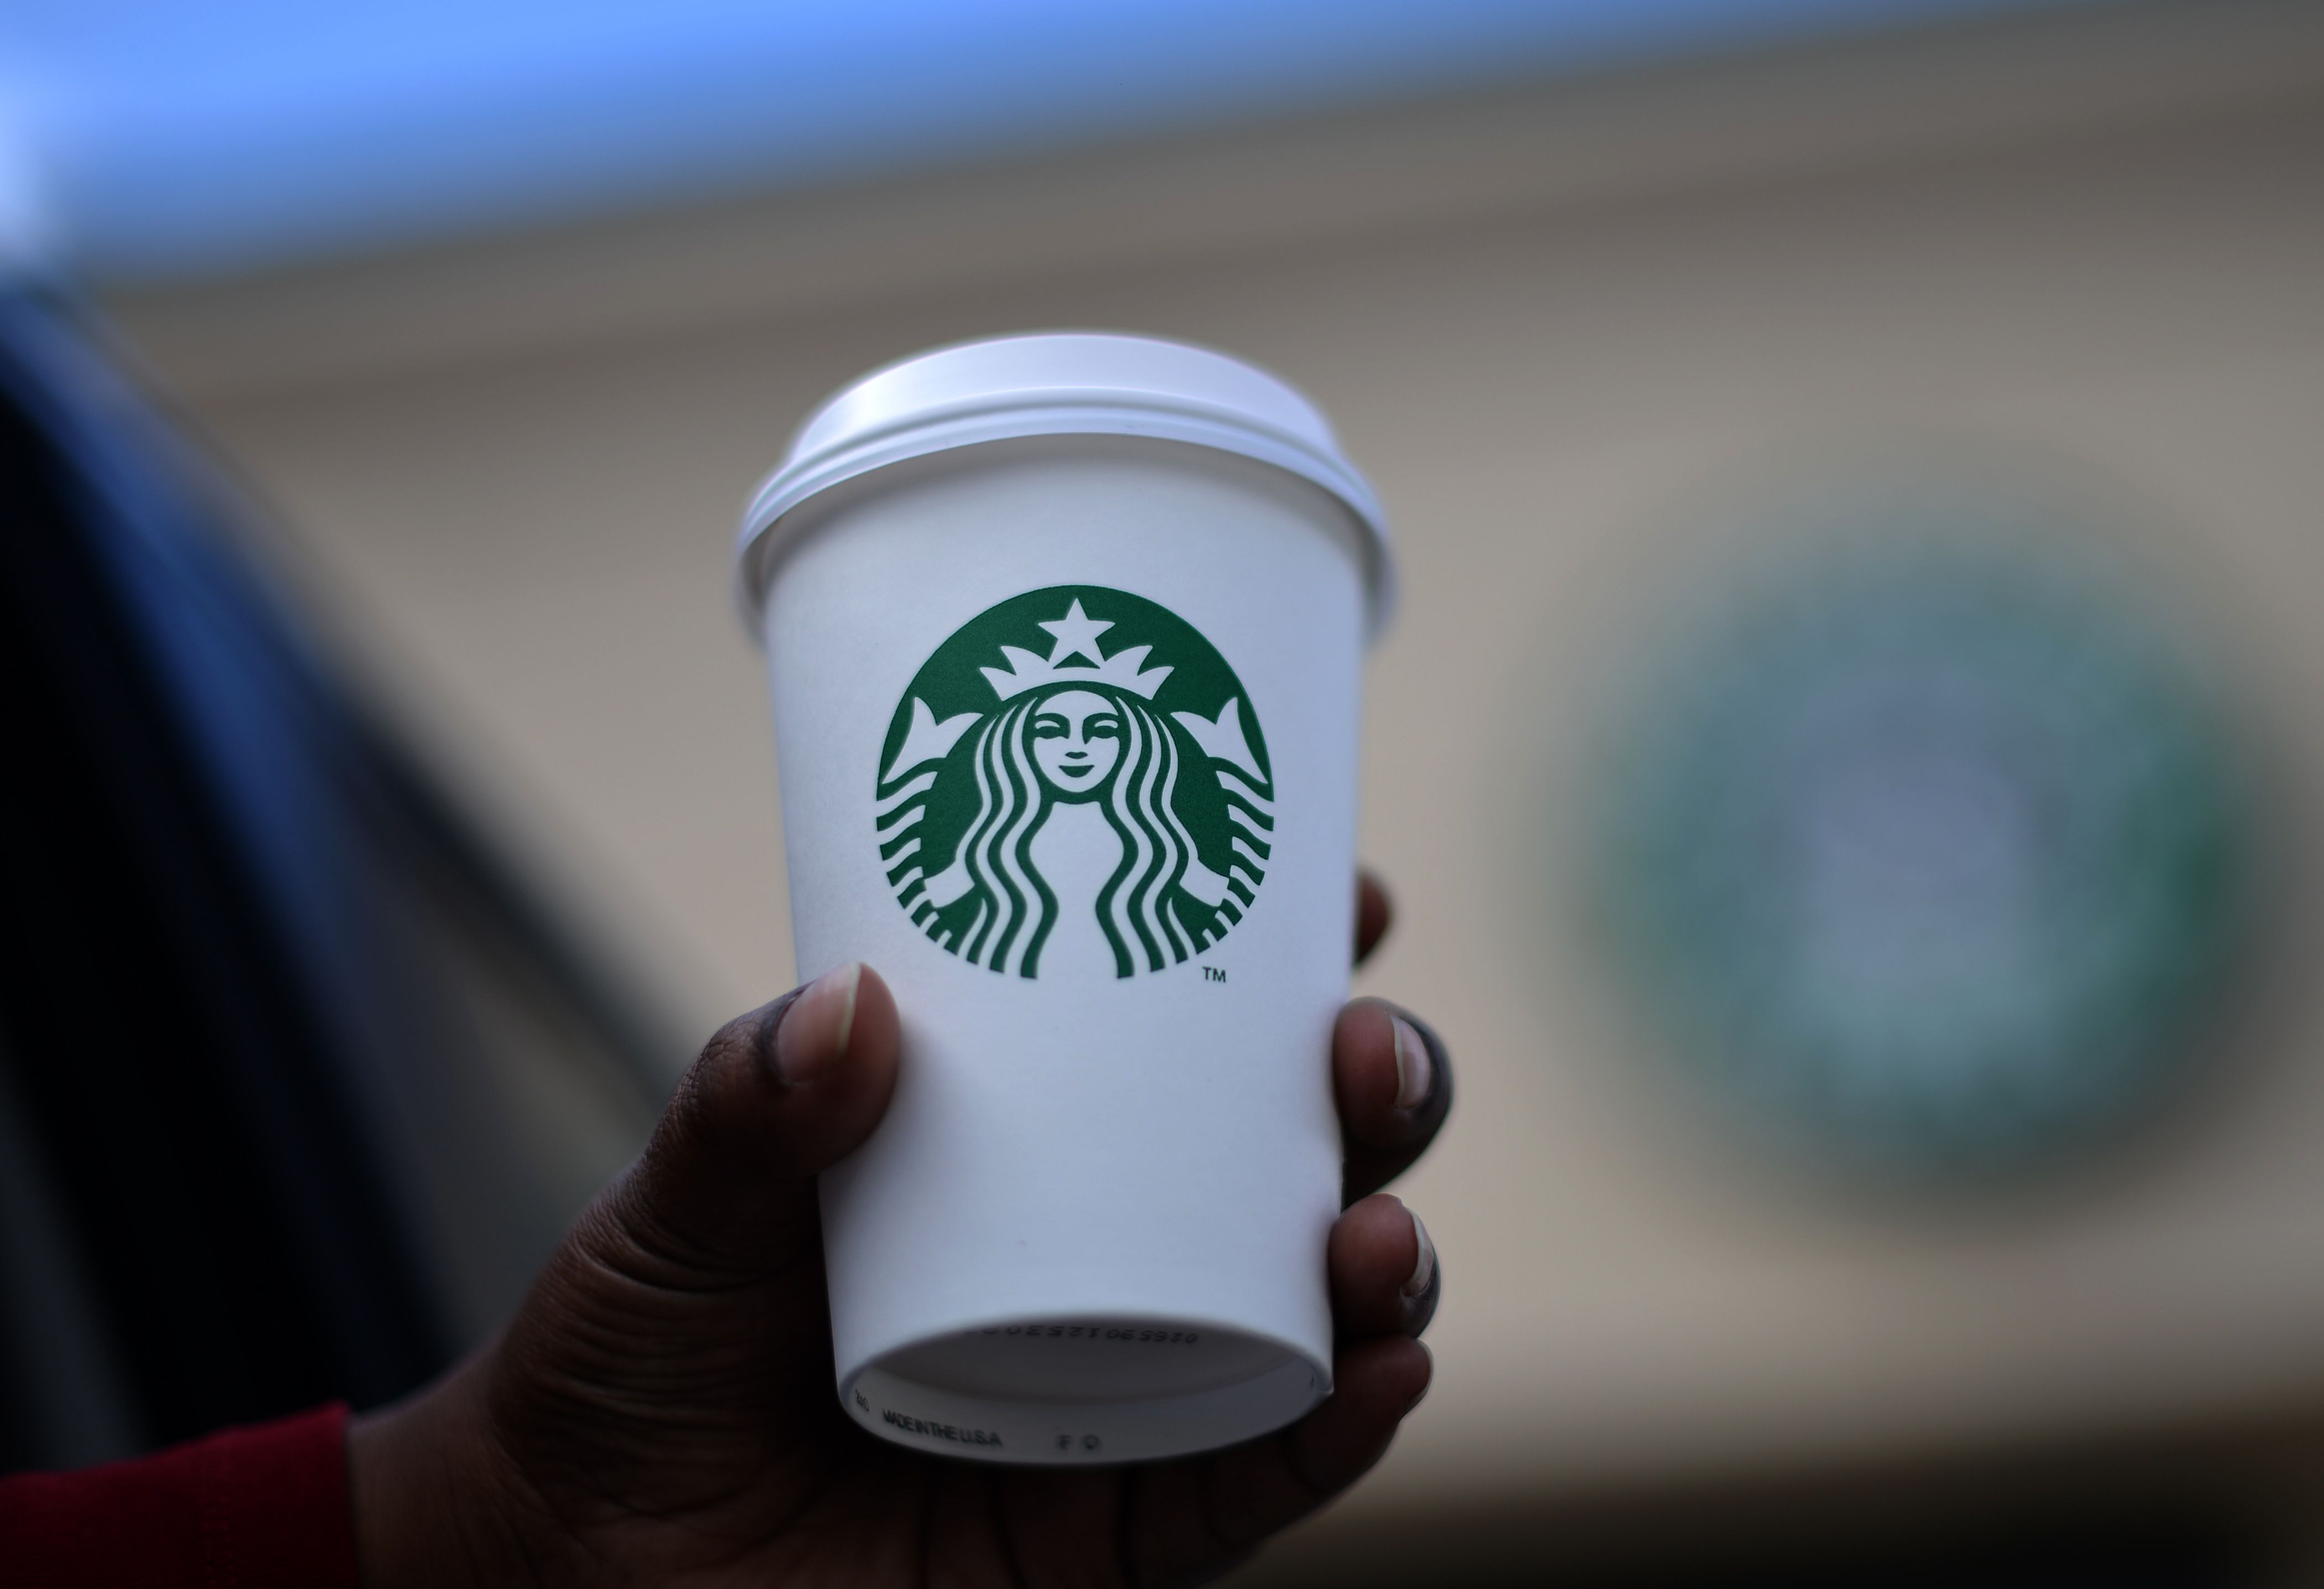 What You Need To Know About Starbucks Newest And Most Exclusive Drink